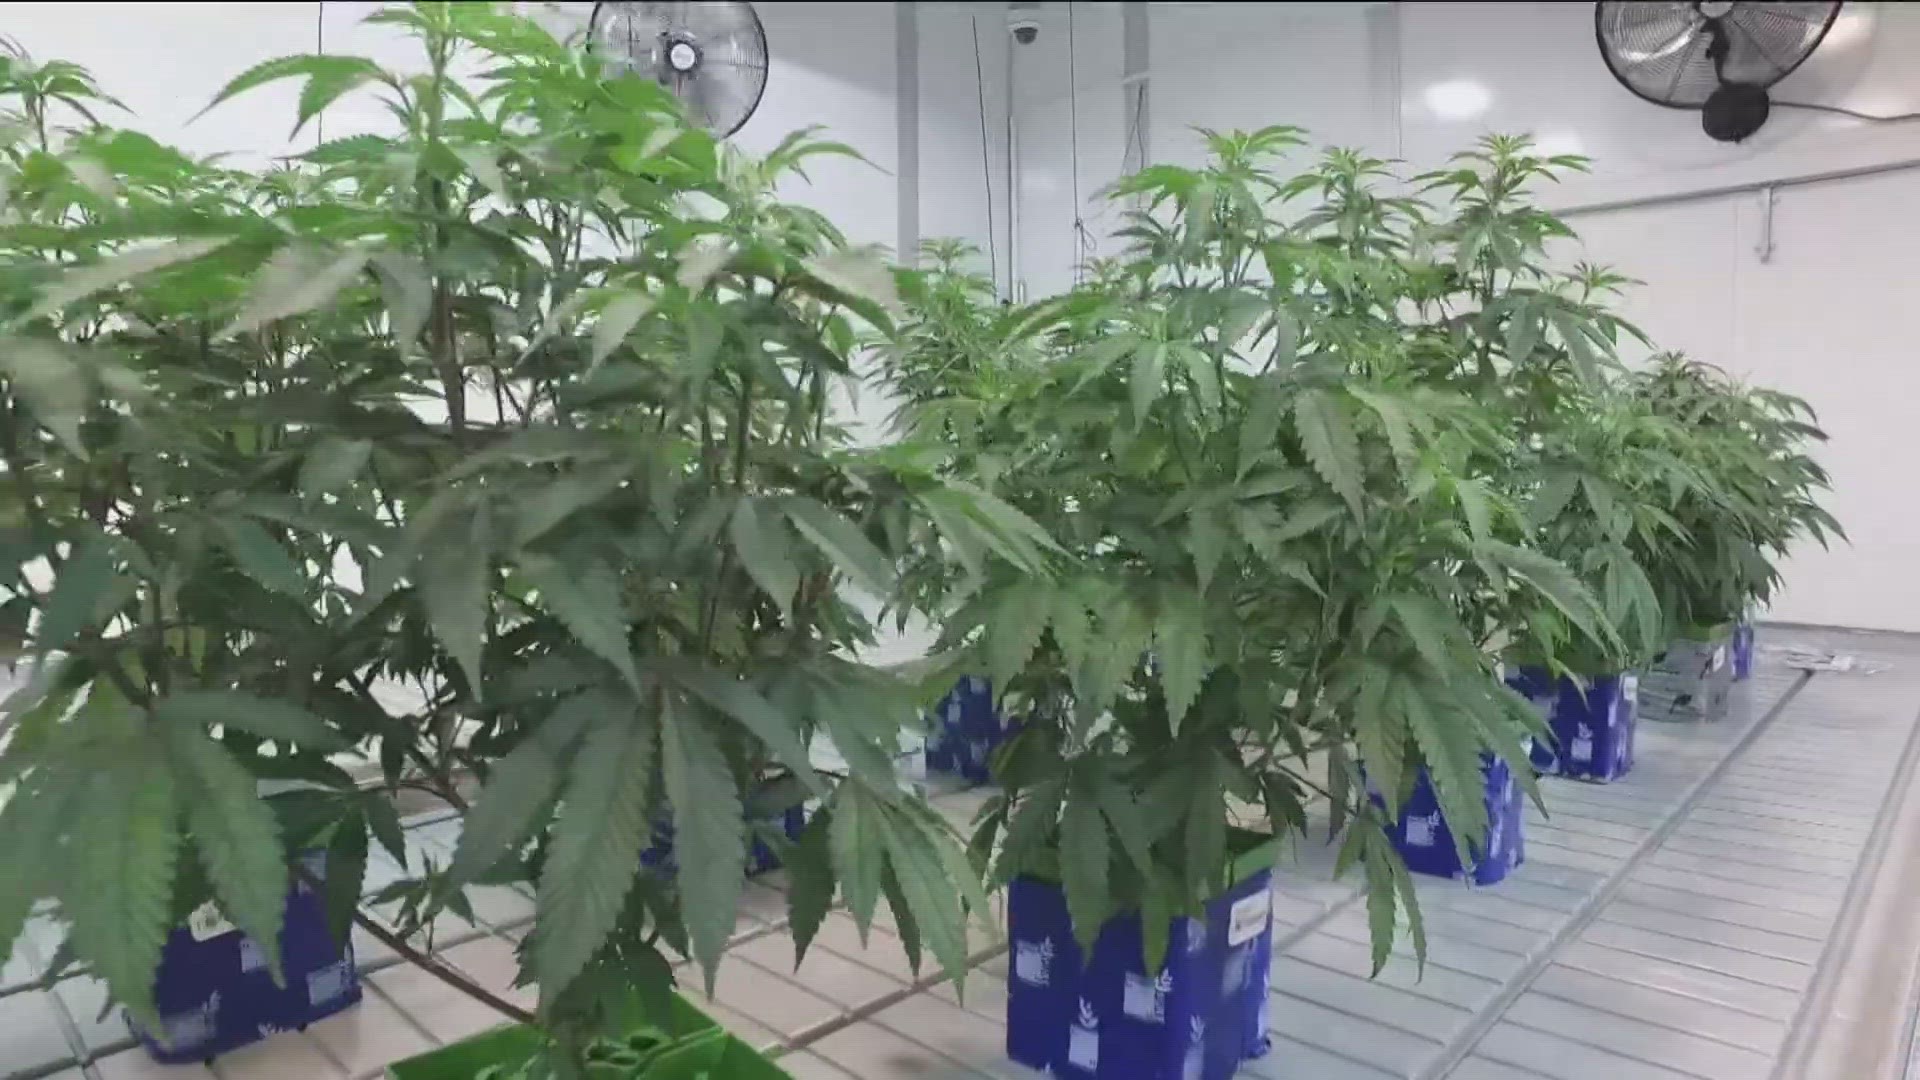 While some areas have ruled whether or not to allow recreational dispensaries, others remain undecided. WTOL 11 spoke with some residents for insight on the topic.